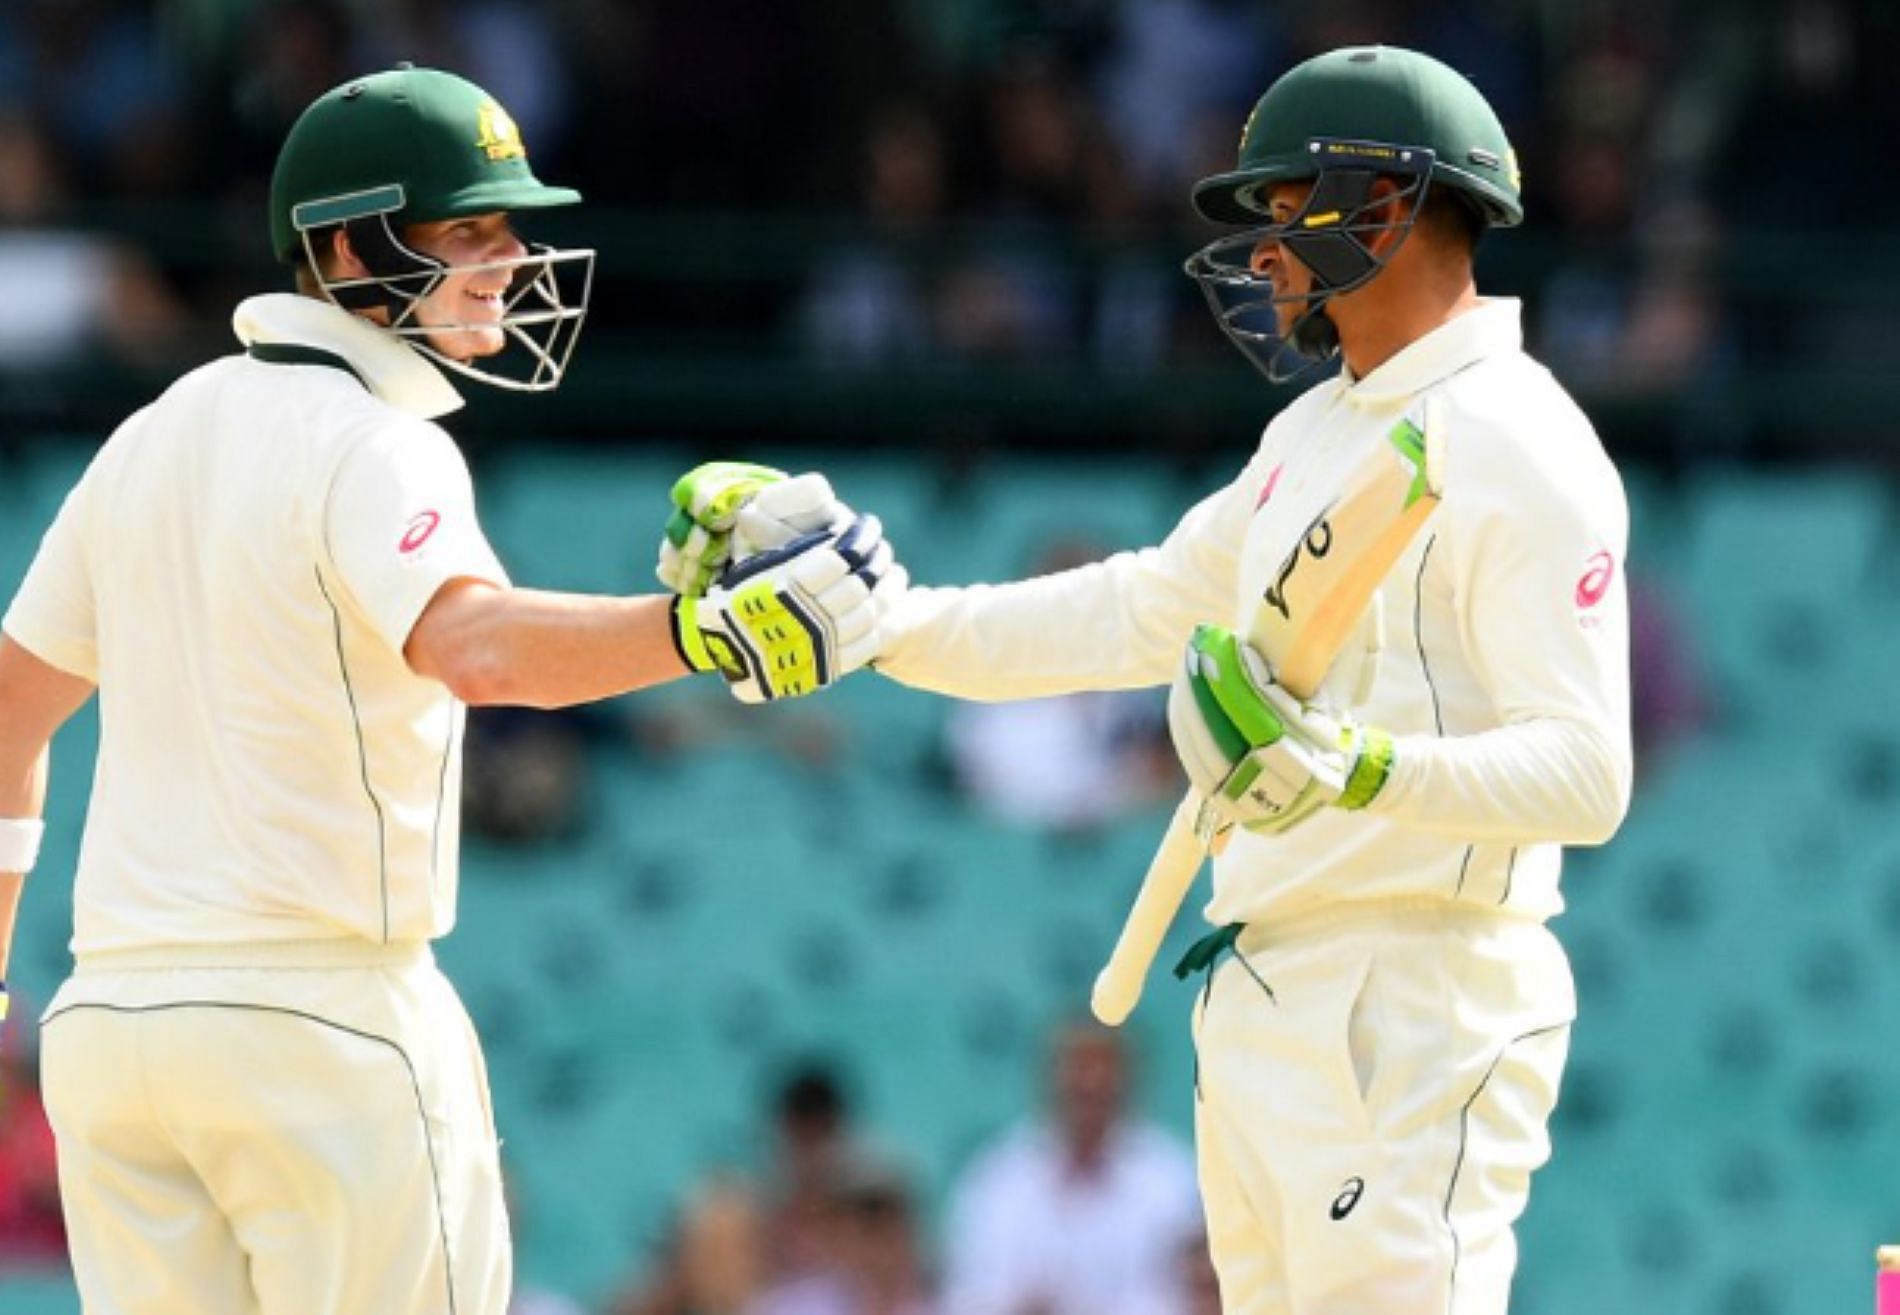 Smith and Khawaja will walk out as Australia